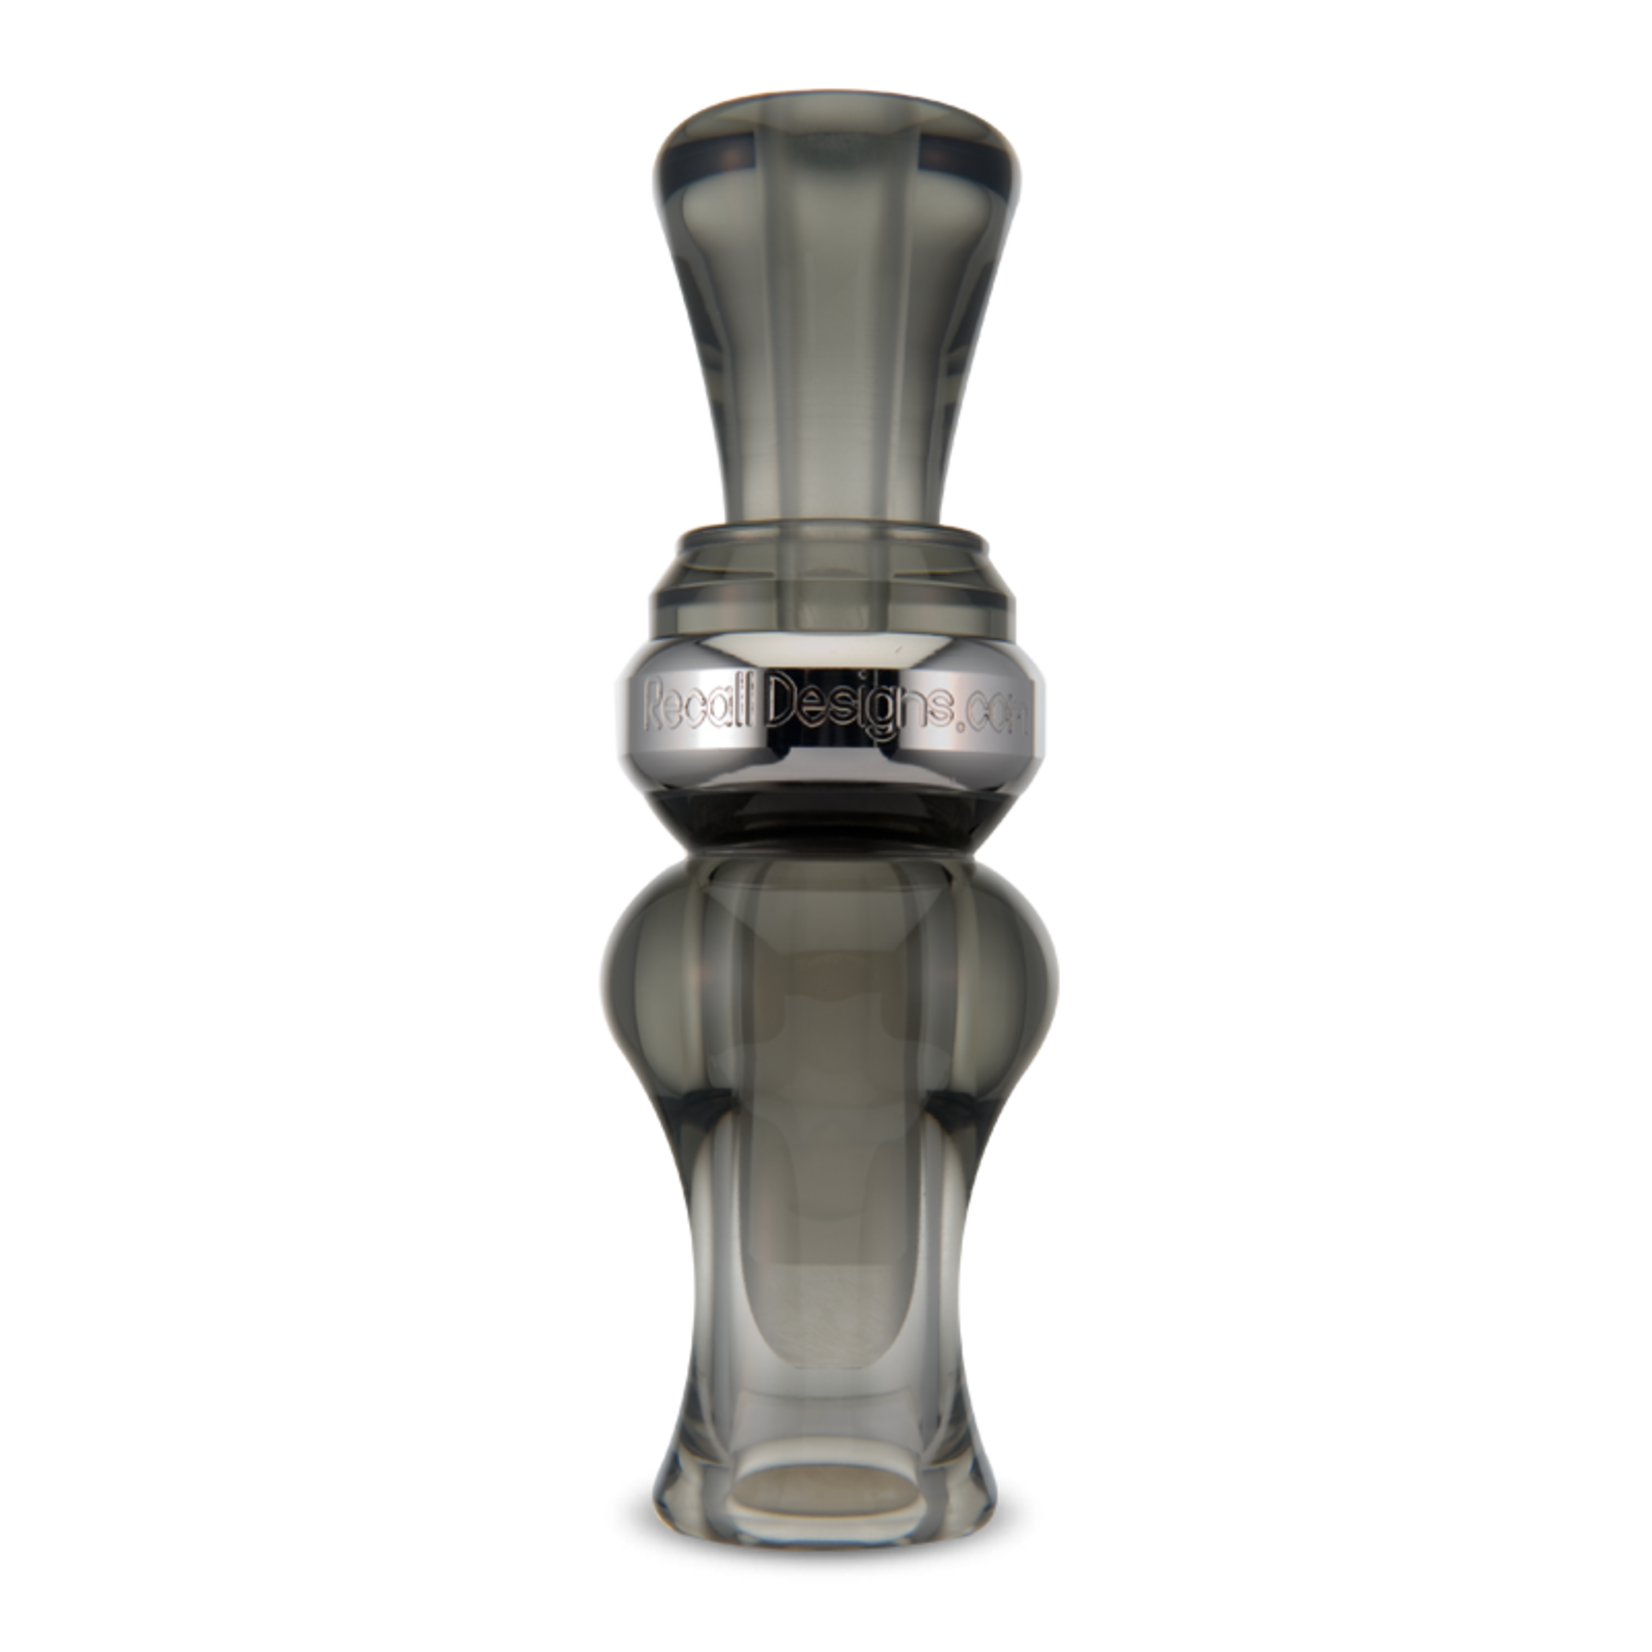 Recall Designs 2 Hen Archy (acrylique double reed)